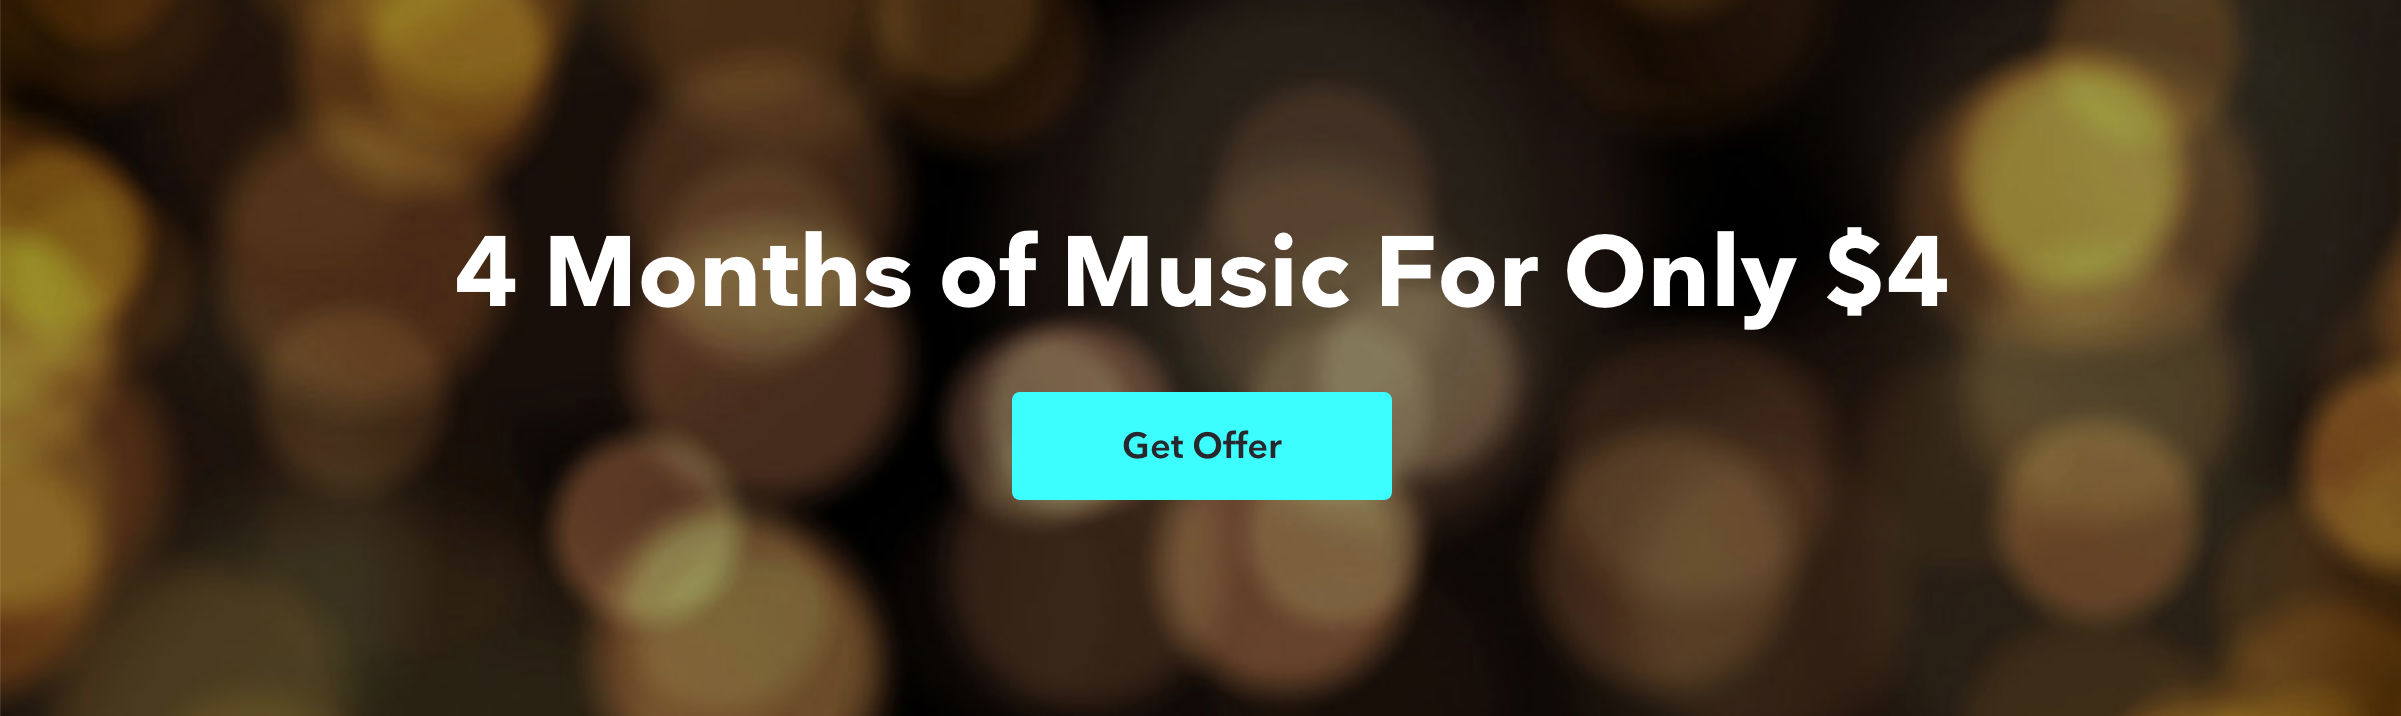 TIDAL’s Holiday Offer – get 4 months of Premium or HiFi for just $/£4